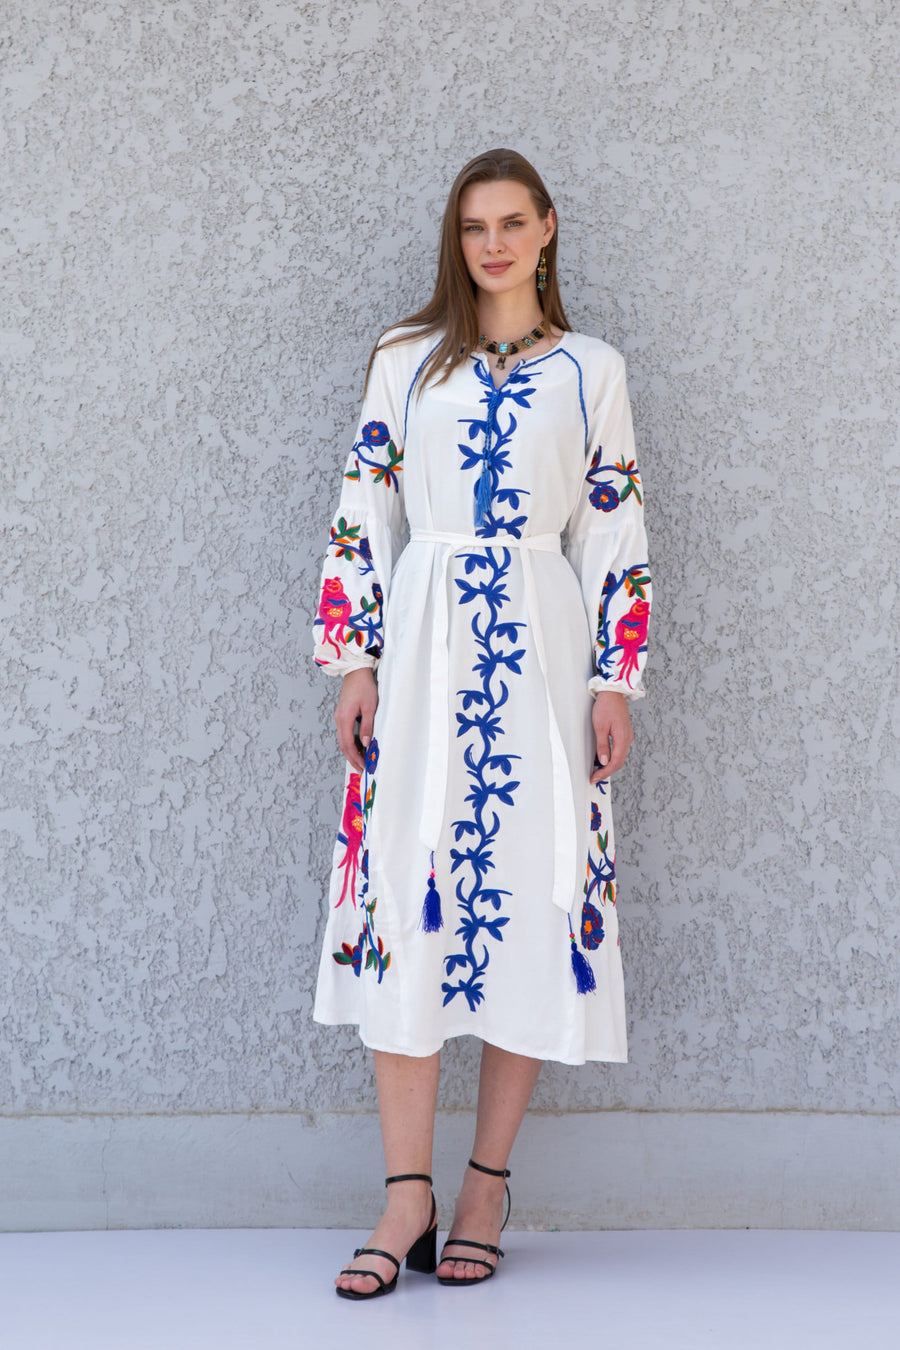 Midi White cotton kaftan dress, embroidered tunic dress, caftans for women, Egyptian cotton. Summer caftan, party, casual, home dress